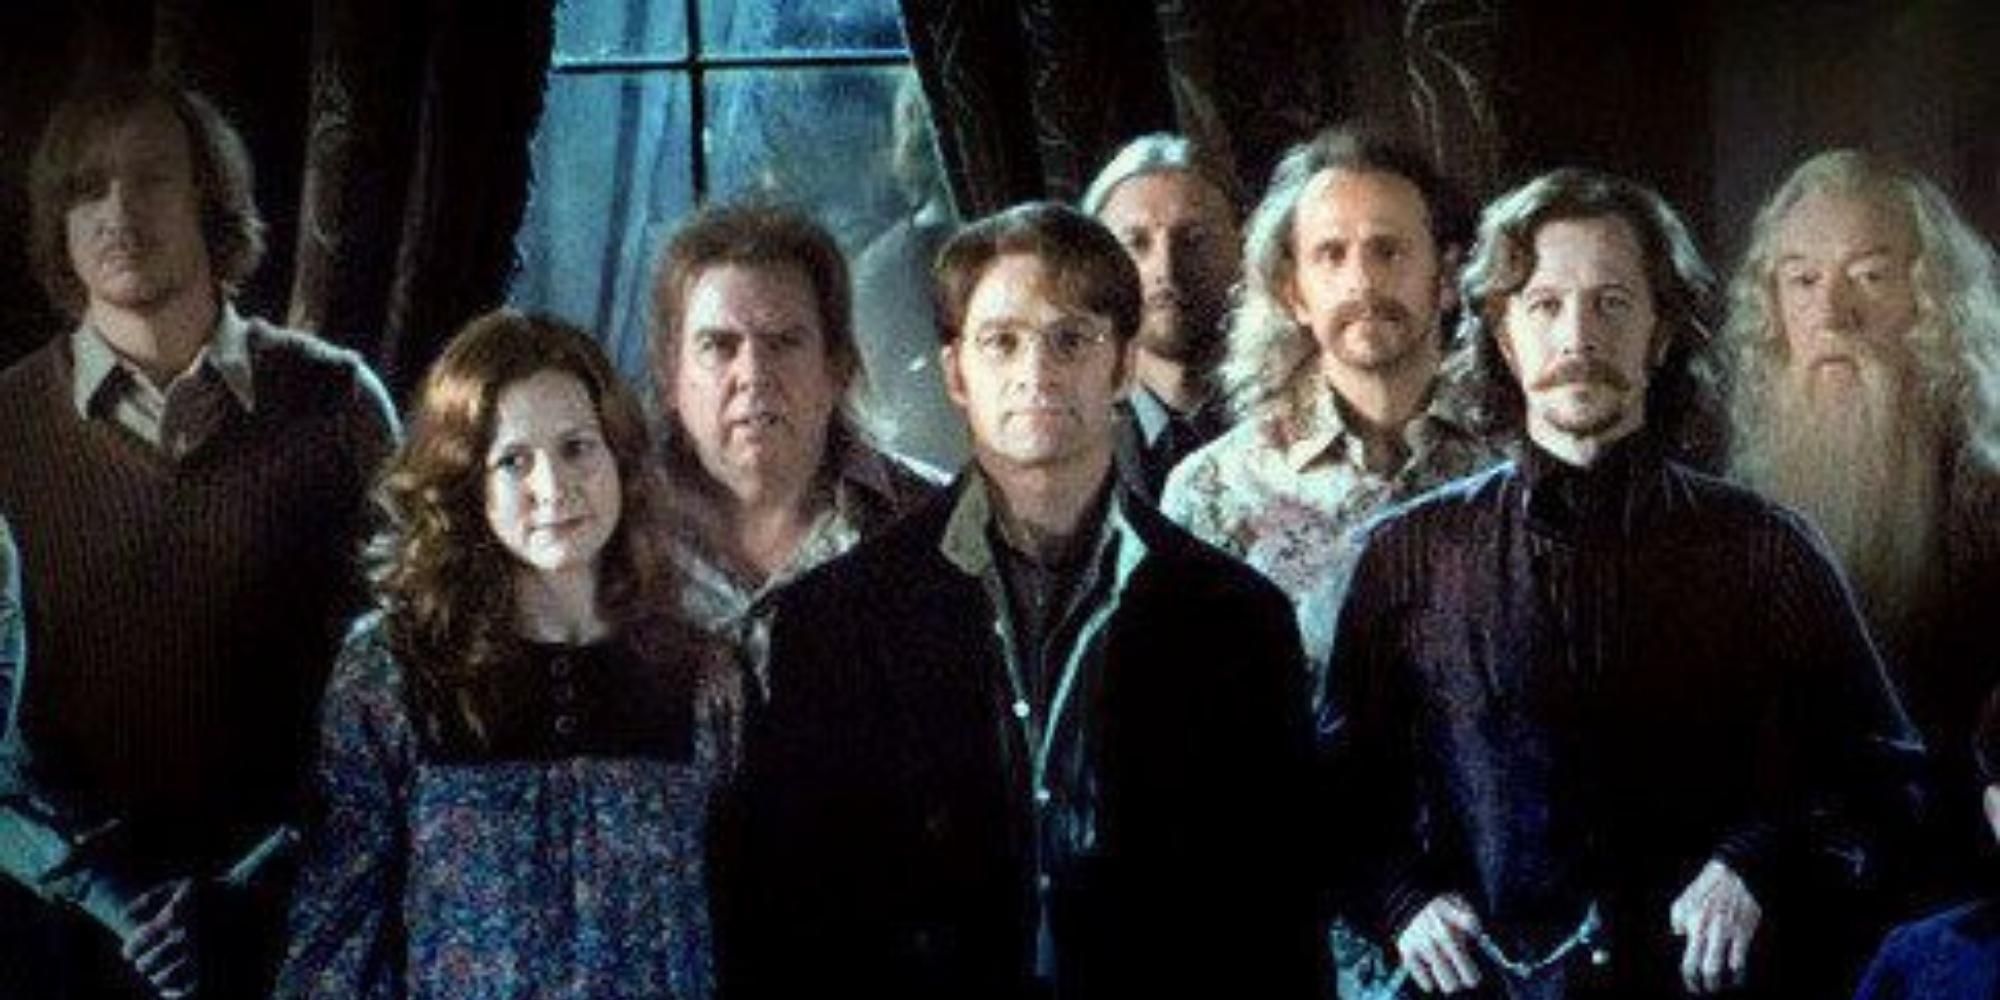 members of The Order of the Phoenix in Harry Potter